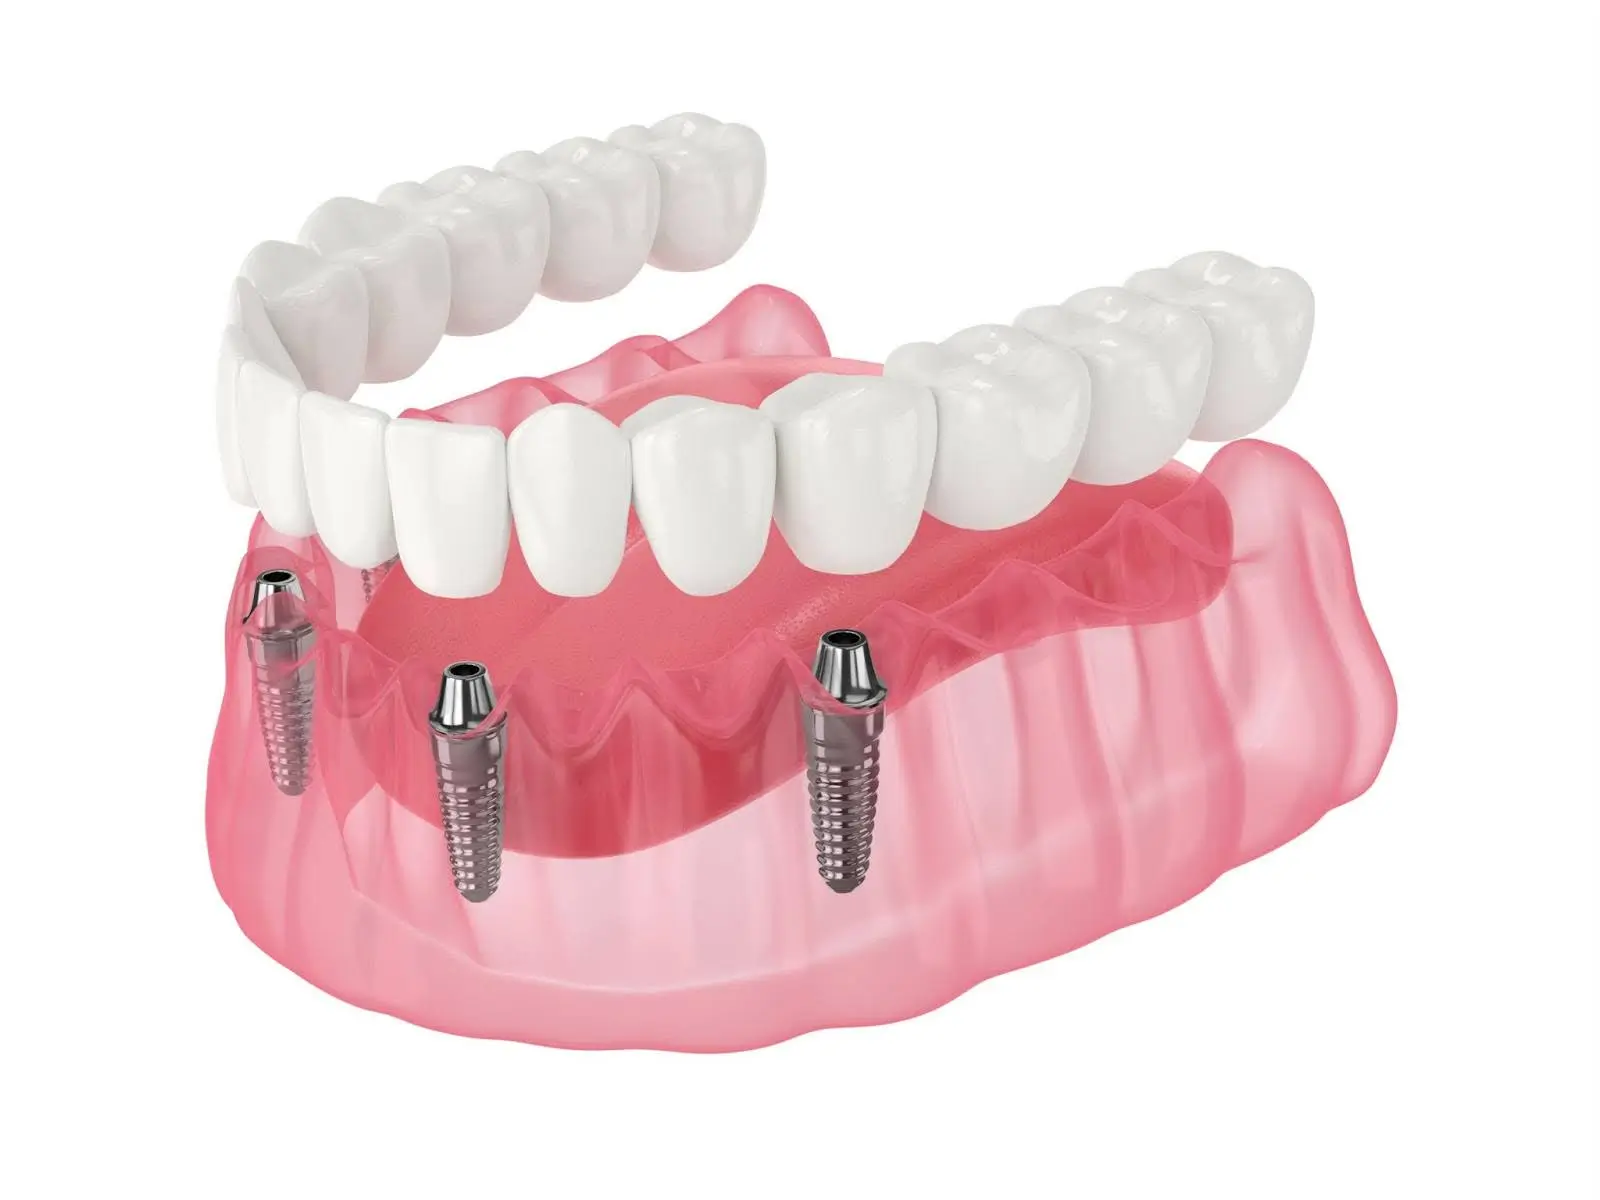 Pros and Cons of Overdentures